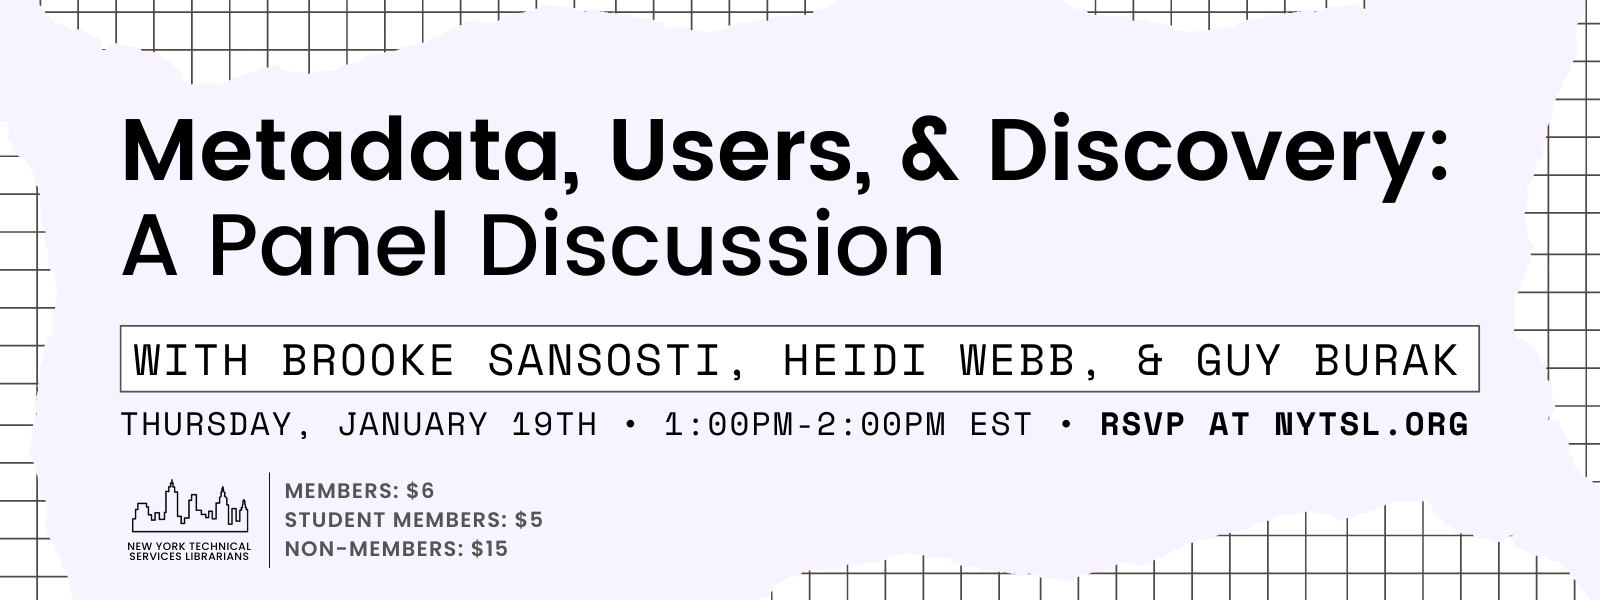 Rectangle with light purple amorphous shape on top of white field gridded with black lines. Title in large black letters reads “Metadata, Users, & Discovery: A Panel Discussion”. Subtitle in black letters on a white rectangle reads “with Brooke Sansosti, Heidi Webb, & Guy Burak”. Under the subtitle is black text that reads “Thursday, January 19th • 1:00pm-2:00pm EST • RSVP AT NYTSL.ORG”. Bottom left graphic of black outline of New York City skyline with dark grey text that reads “New York Technical Services Librarians” underneath. To the right of the graphic, dark grey text that reads “Members: $6 / Student Members: $5 / Non-members: $15”. End of image description